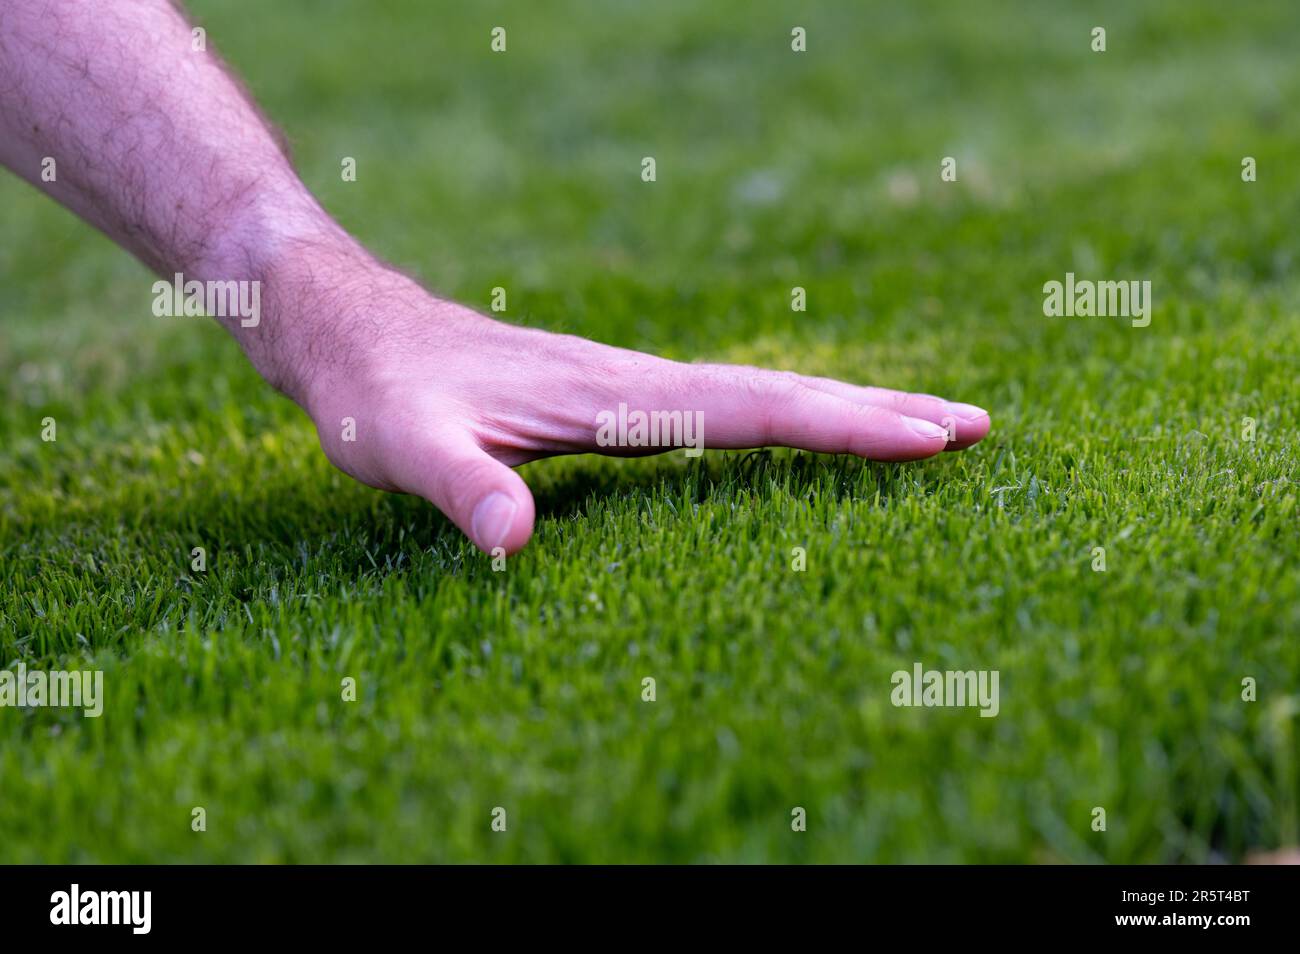 Symbol for taking care of the lawn. Hand feel the height of freshly cut grass. Stock Photo